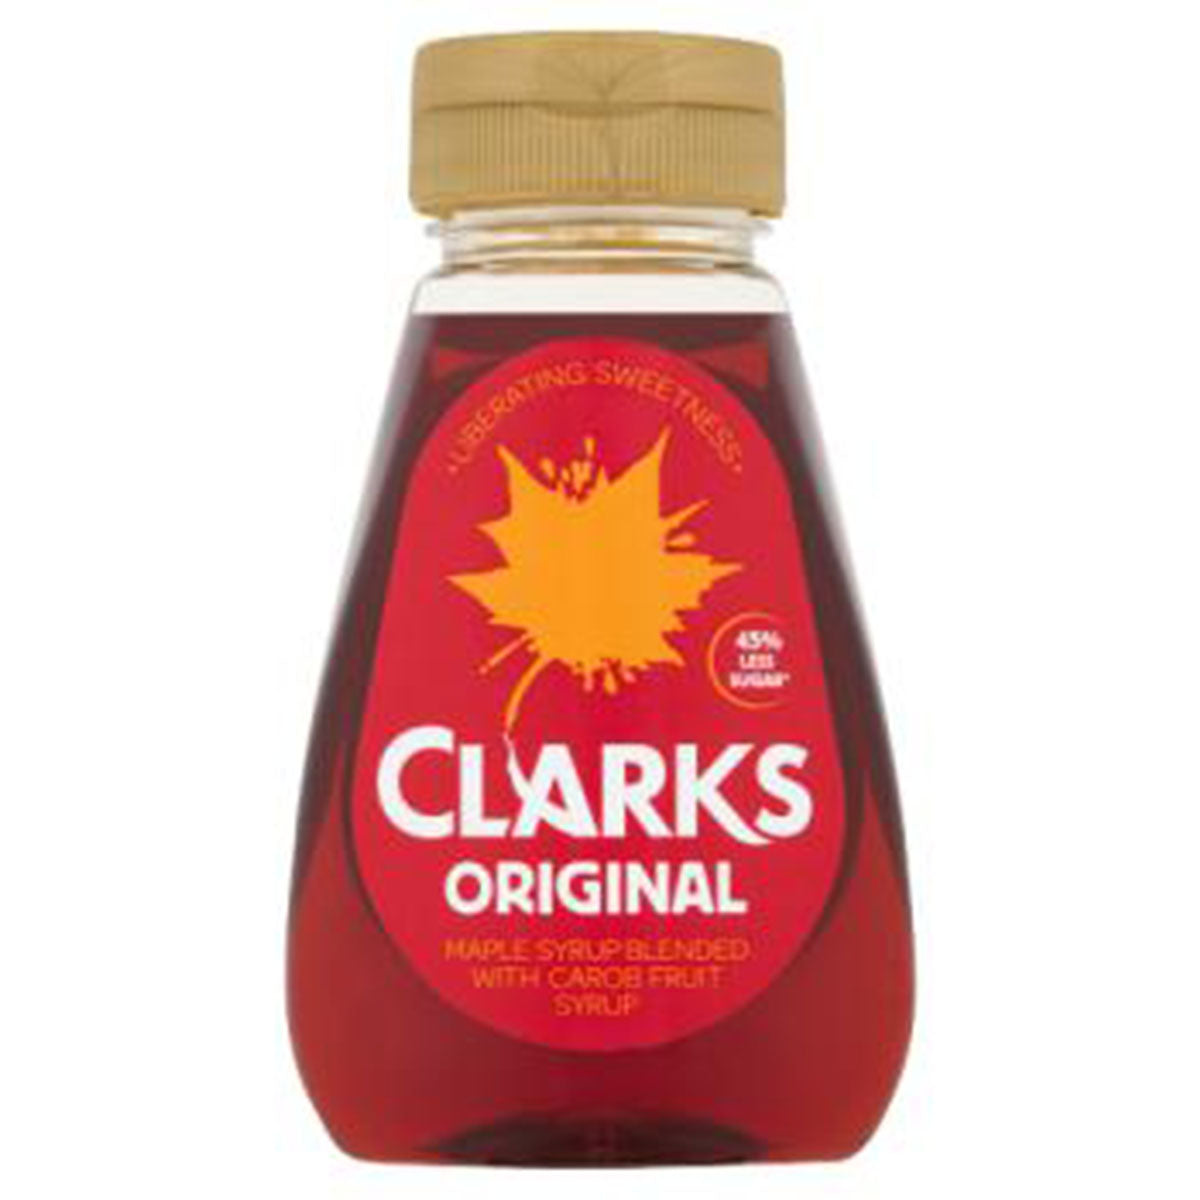 Clarks - Original Maple Syrup Blended with Carob Fruit Syrup - 180ml - Continental Food Store